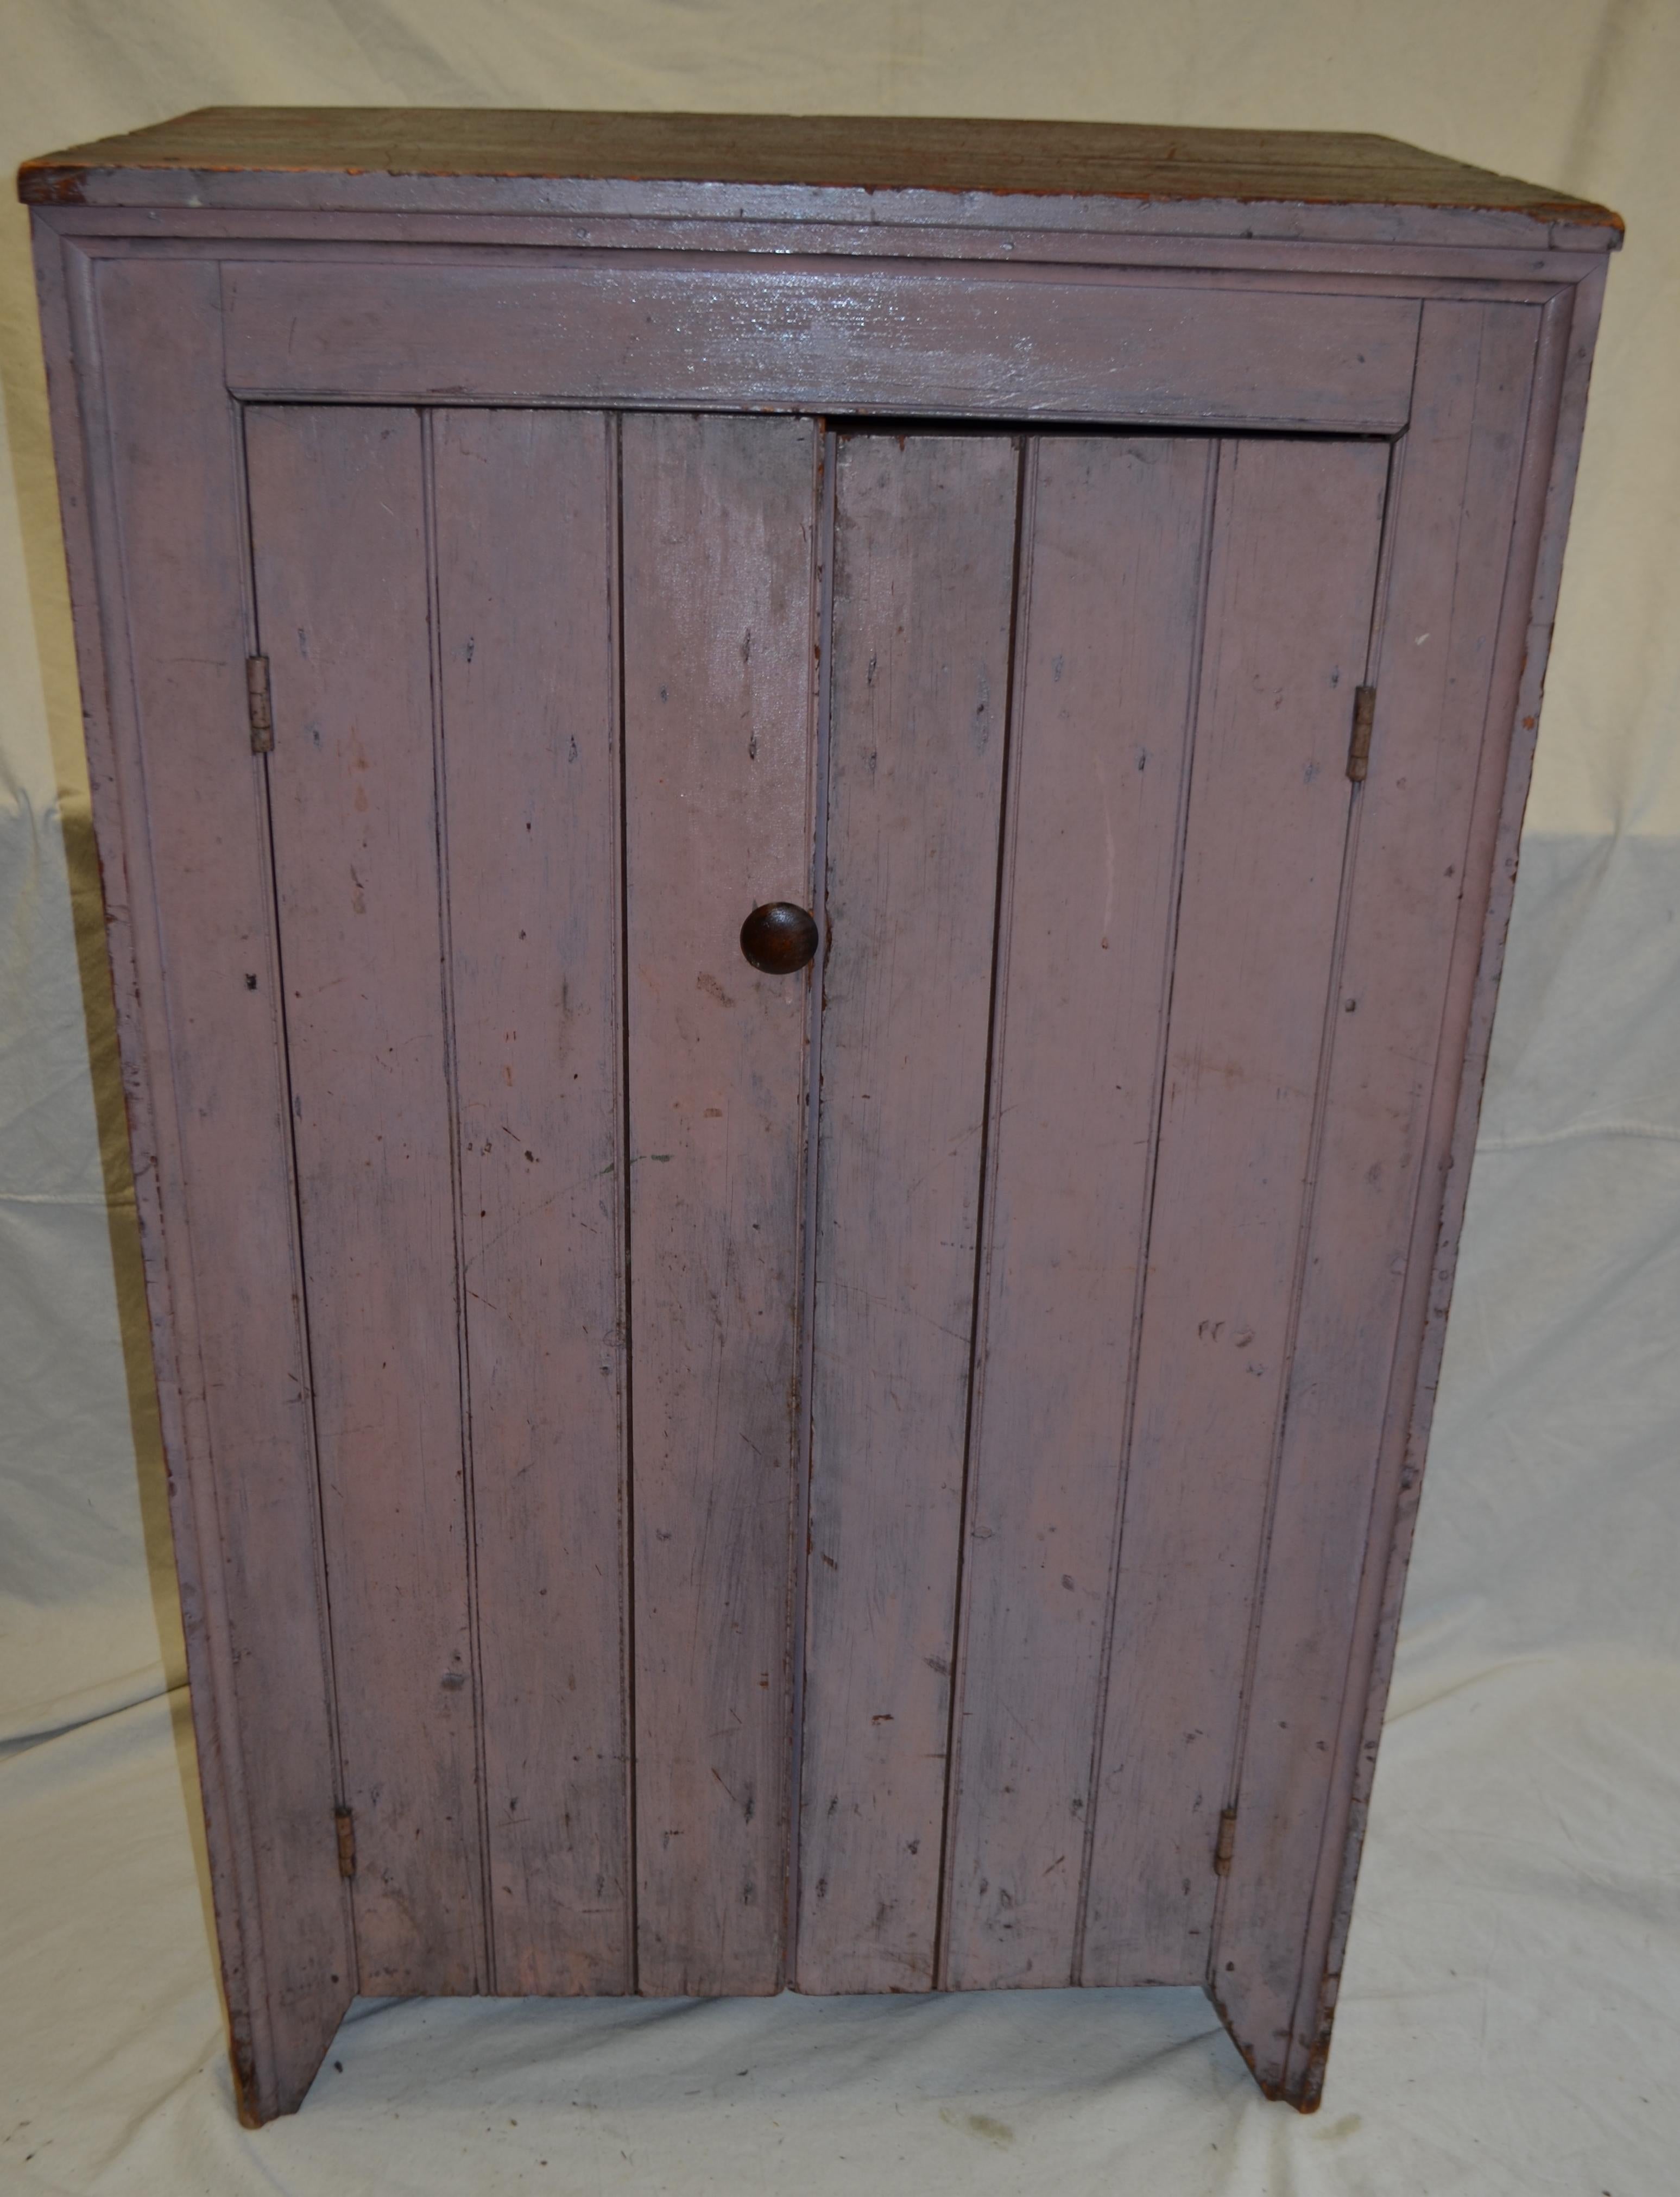 Early 1800s cupboard of double doors from parlor, kitchen, pantry. Classic Americana. Hand-crafted from the boards remaining from the home's interior construction in 1830. Truly original. From use, its top is beautifully mahoganized. Love the